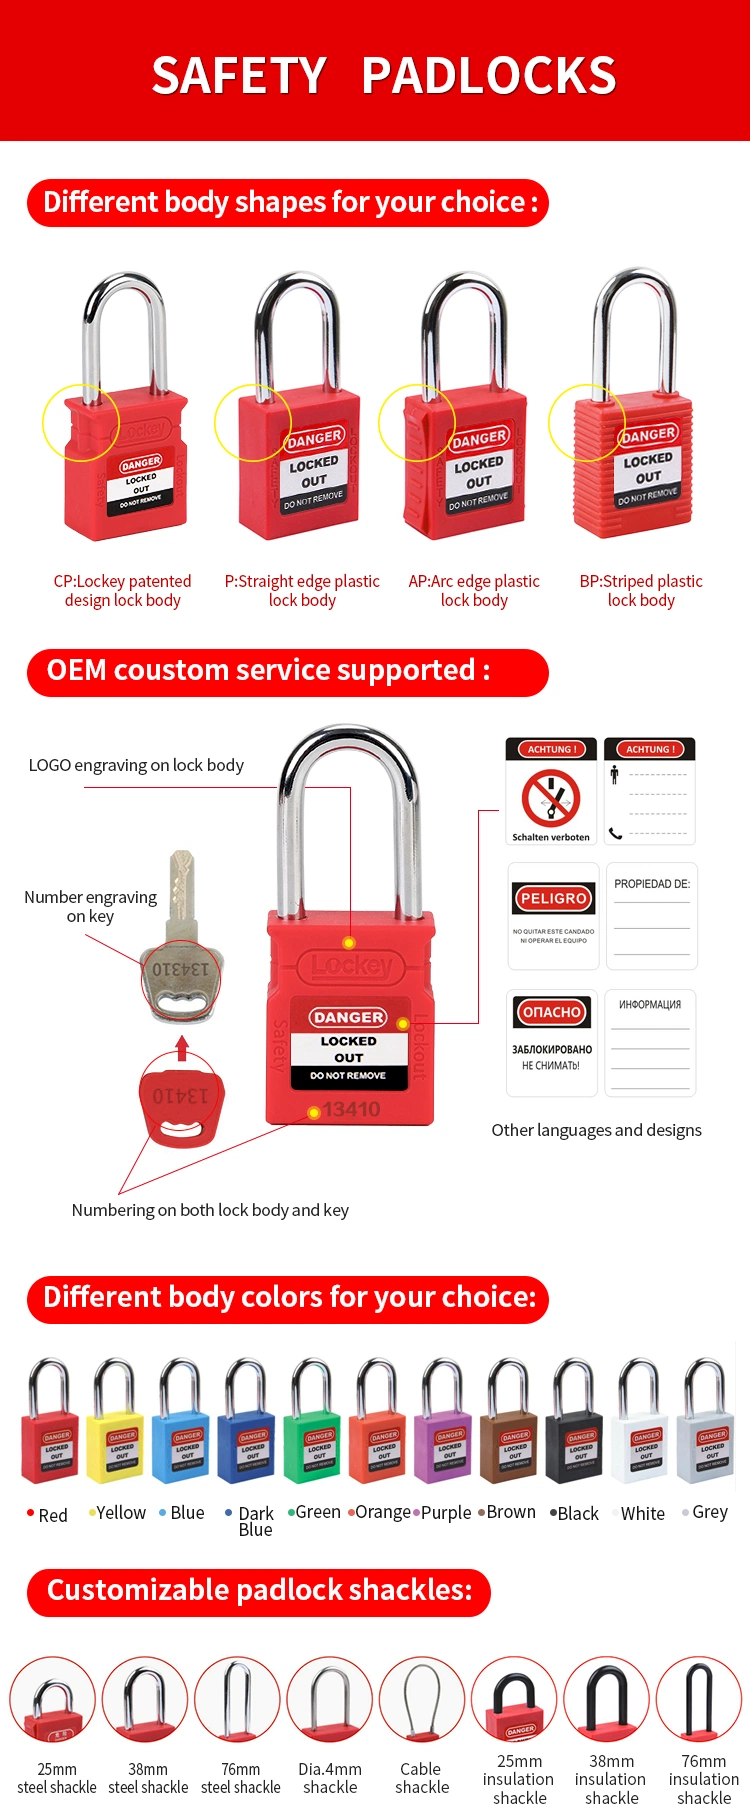 Lockout Tagout Safety Stainless Steel Cable Wire Lock Padlock